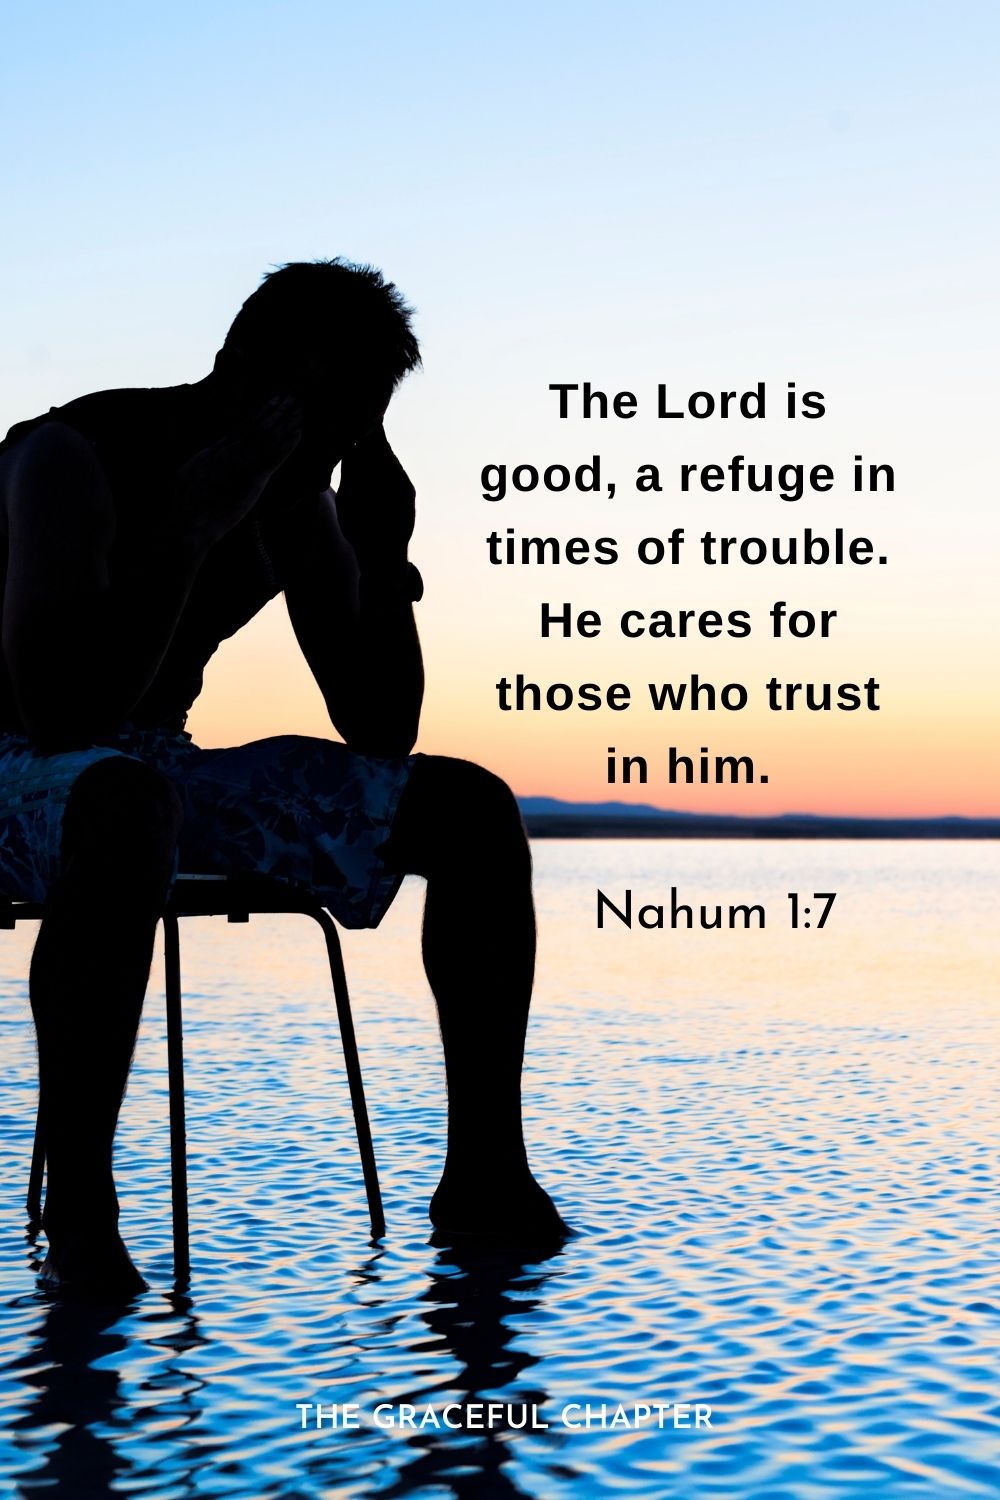 The Lord is good, a refuge in times of trouble. He cares for those who trust in him.